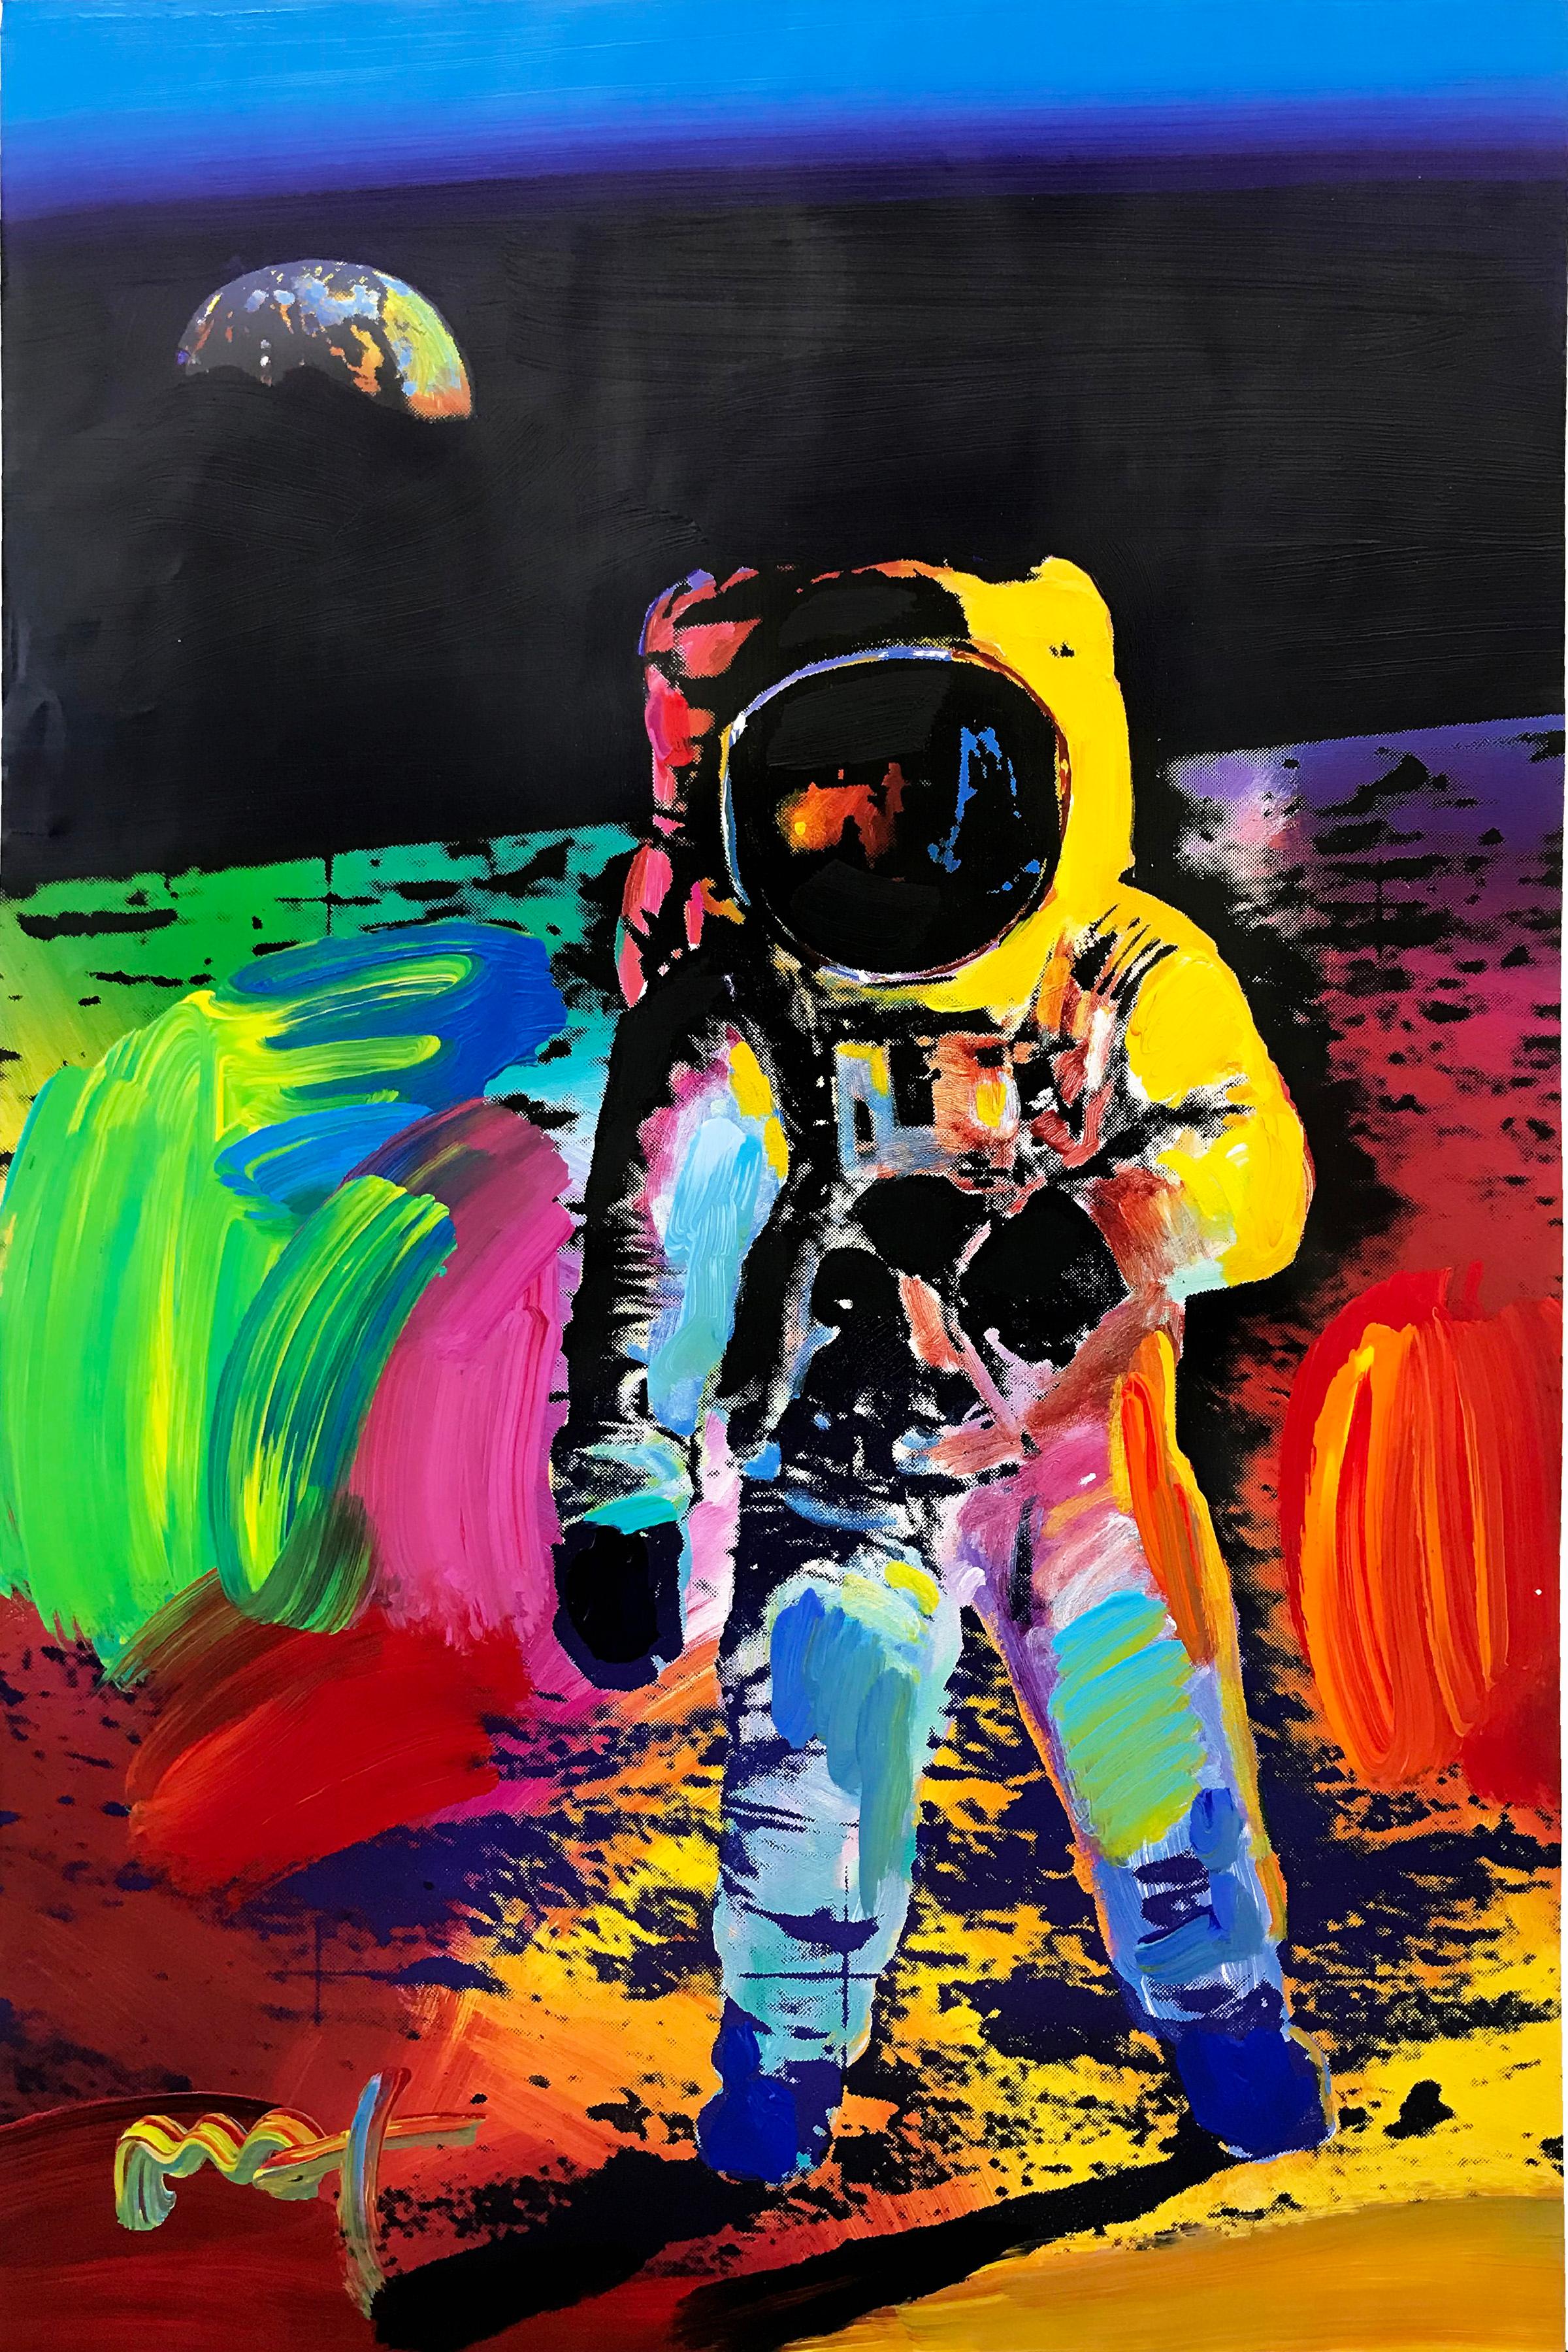 WALKING ON THE MOON #28 - Painting by Peter Max